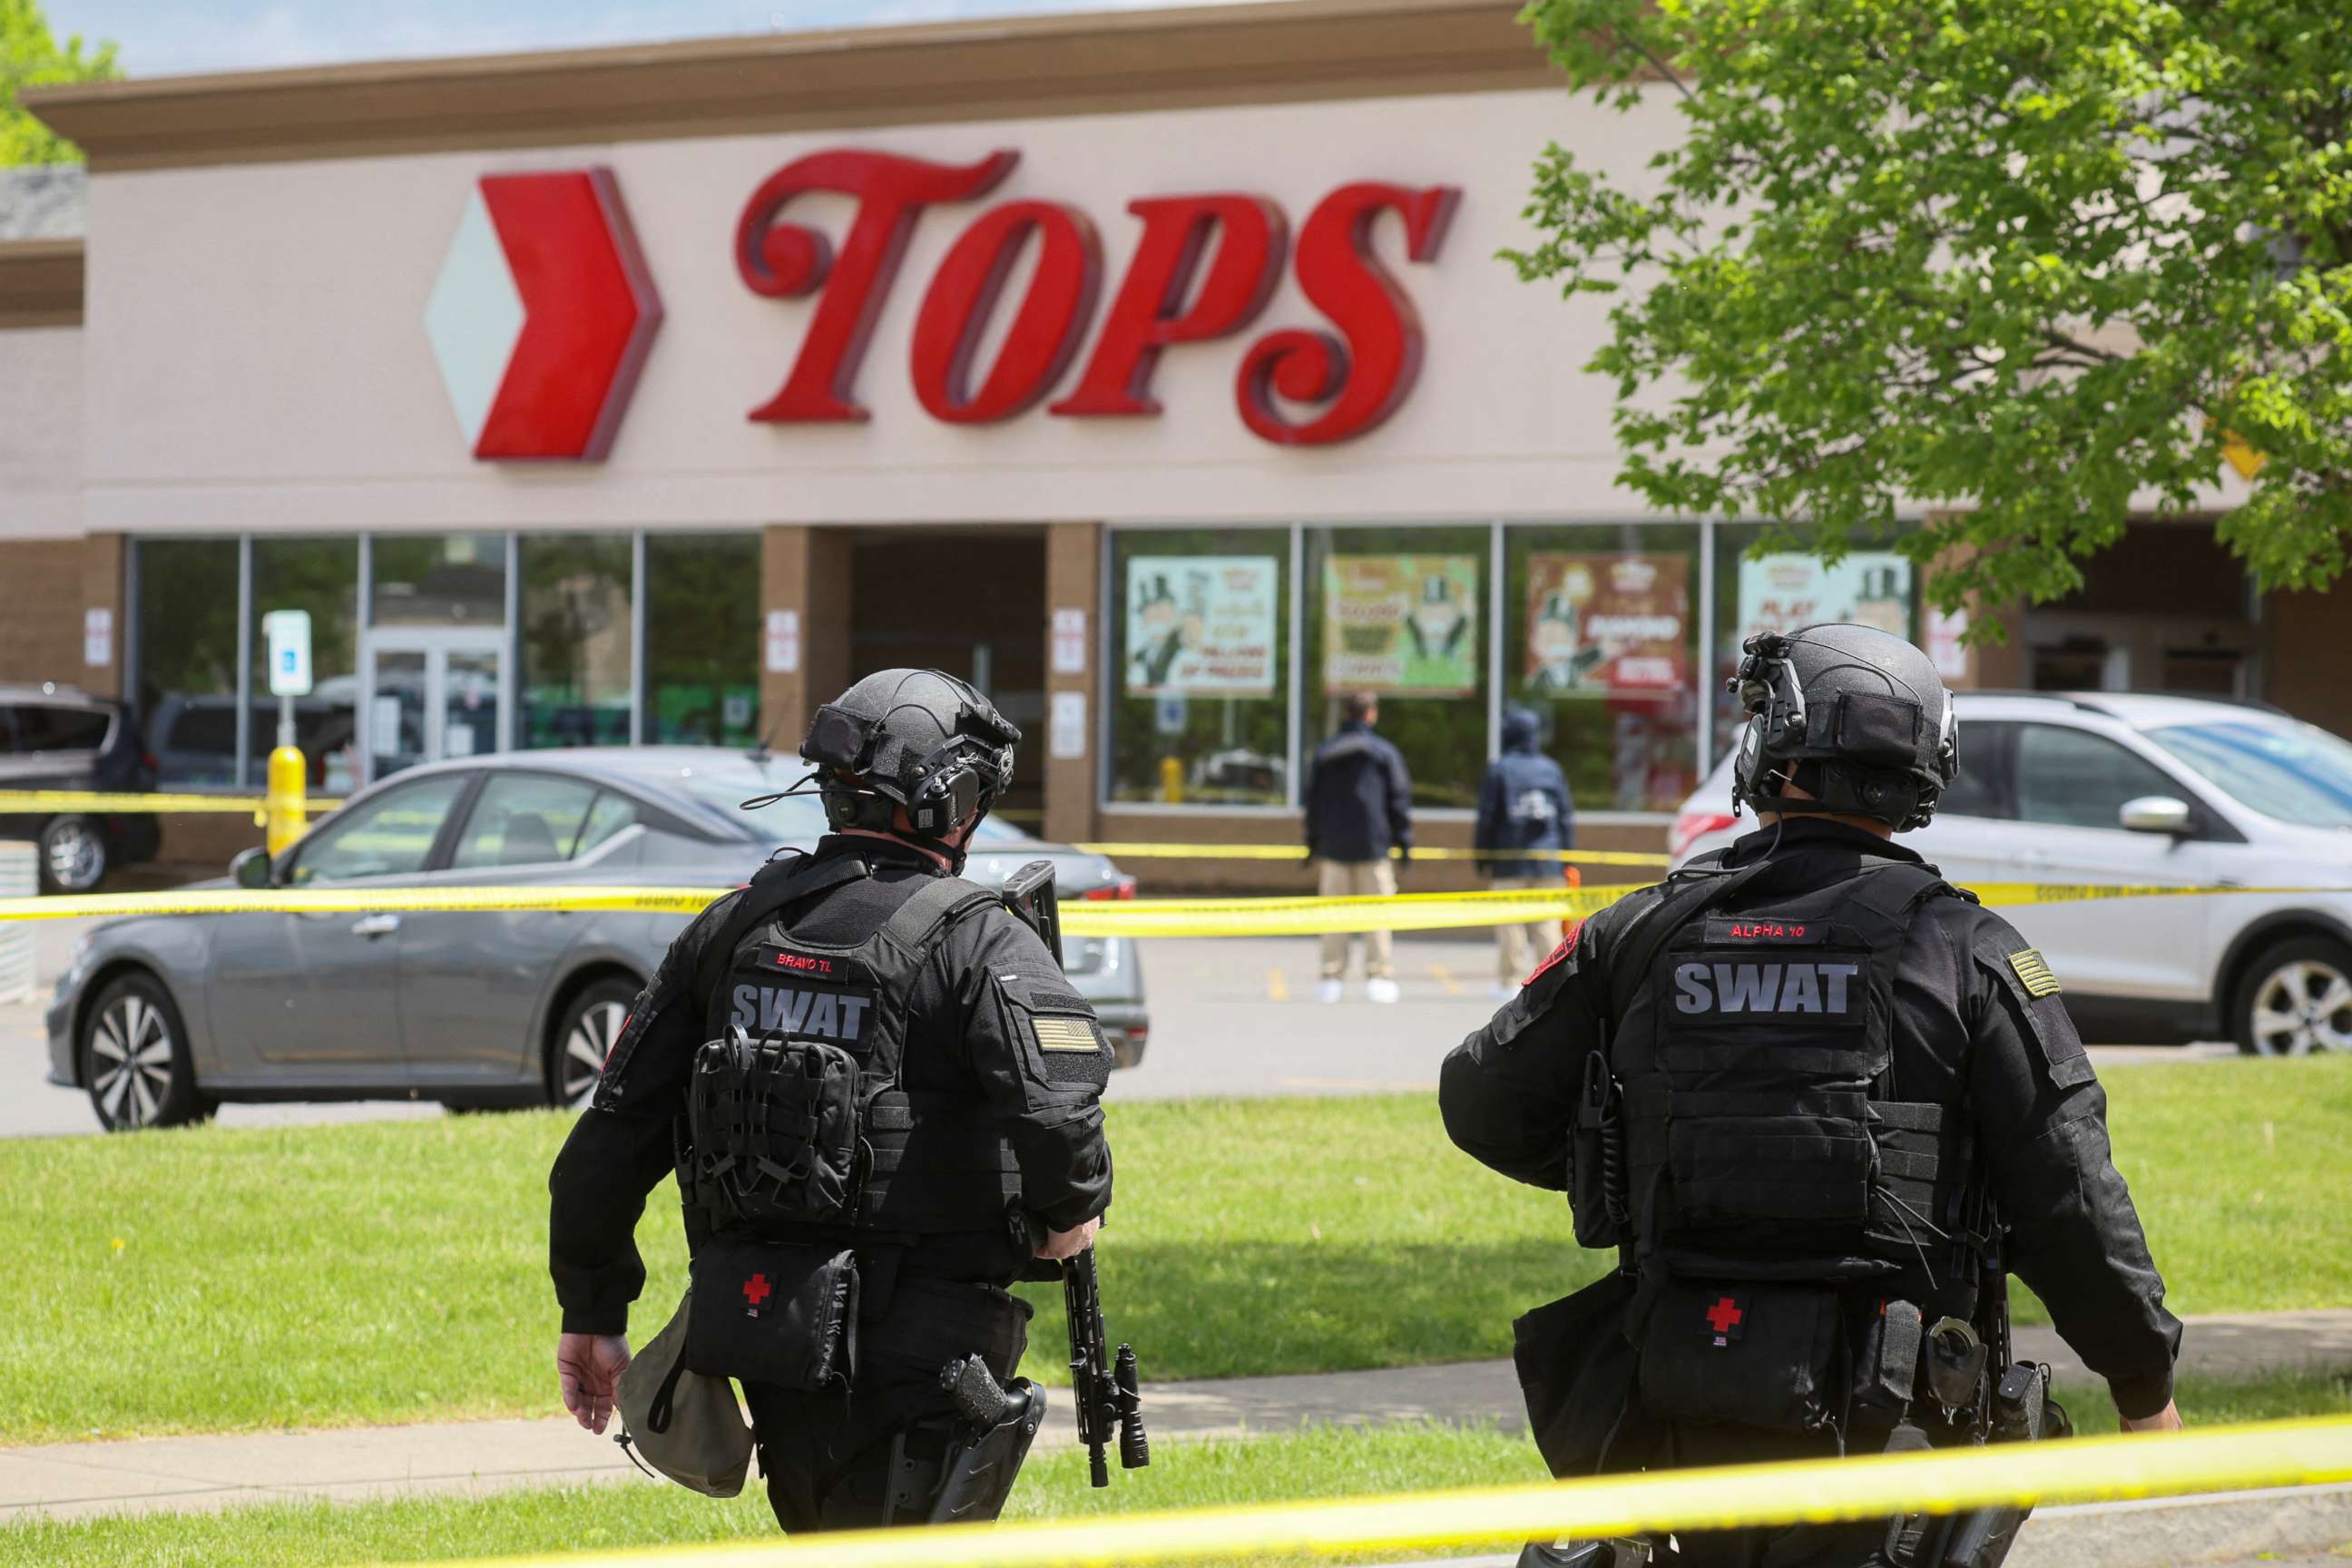 PHOTO: Members of the Buffalo Police Department work at the scene of a shooting at a Tops supermarket in Buffalo, N.Y., May 17, 2022.